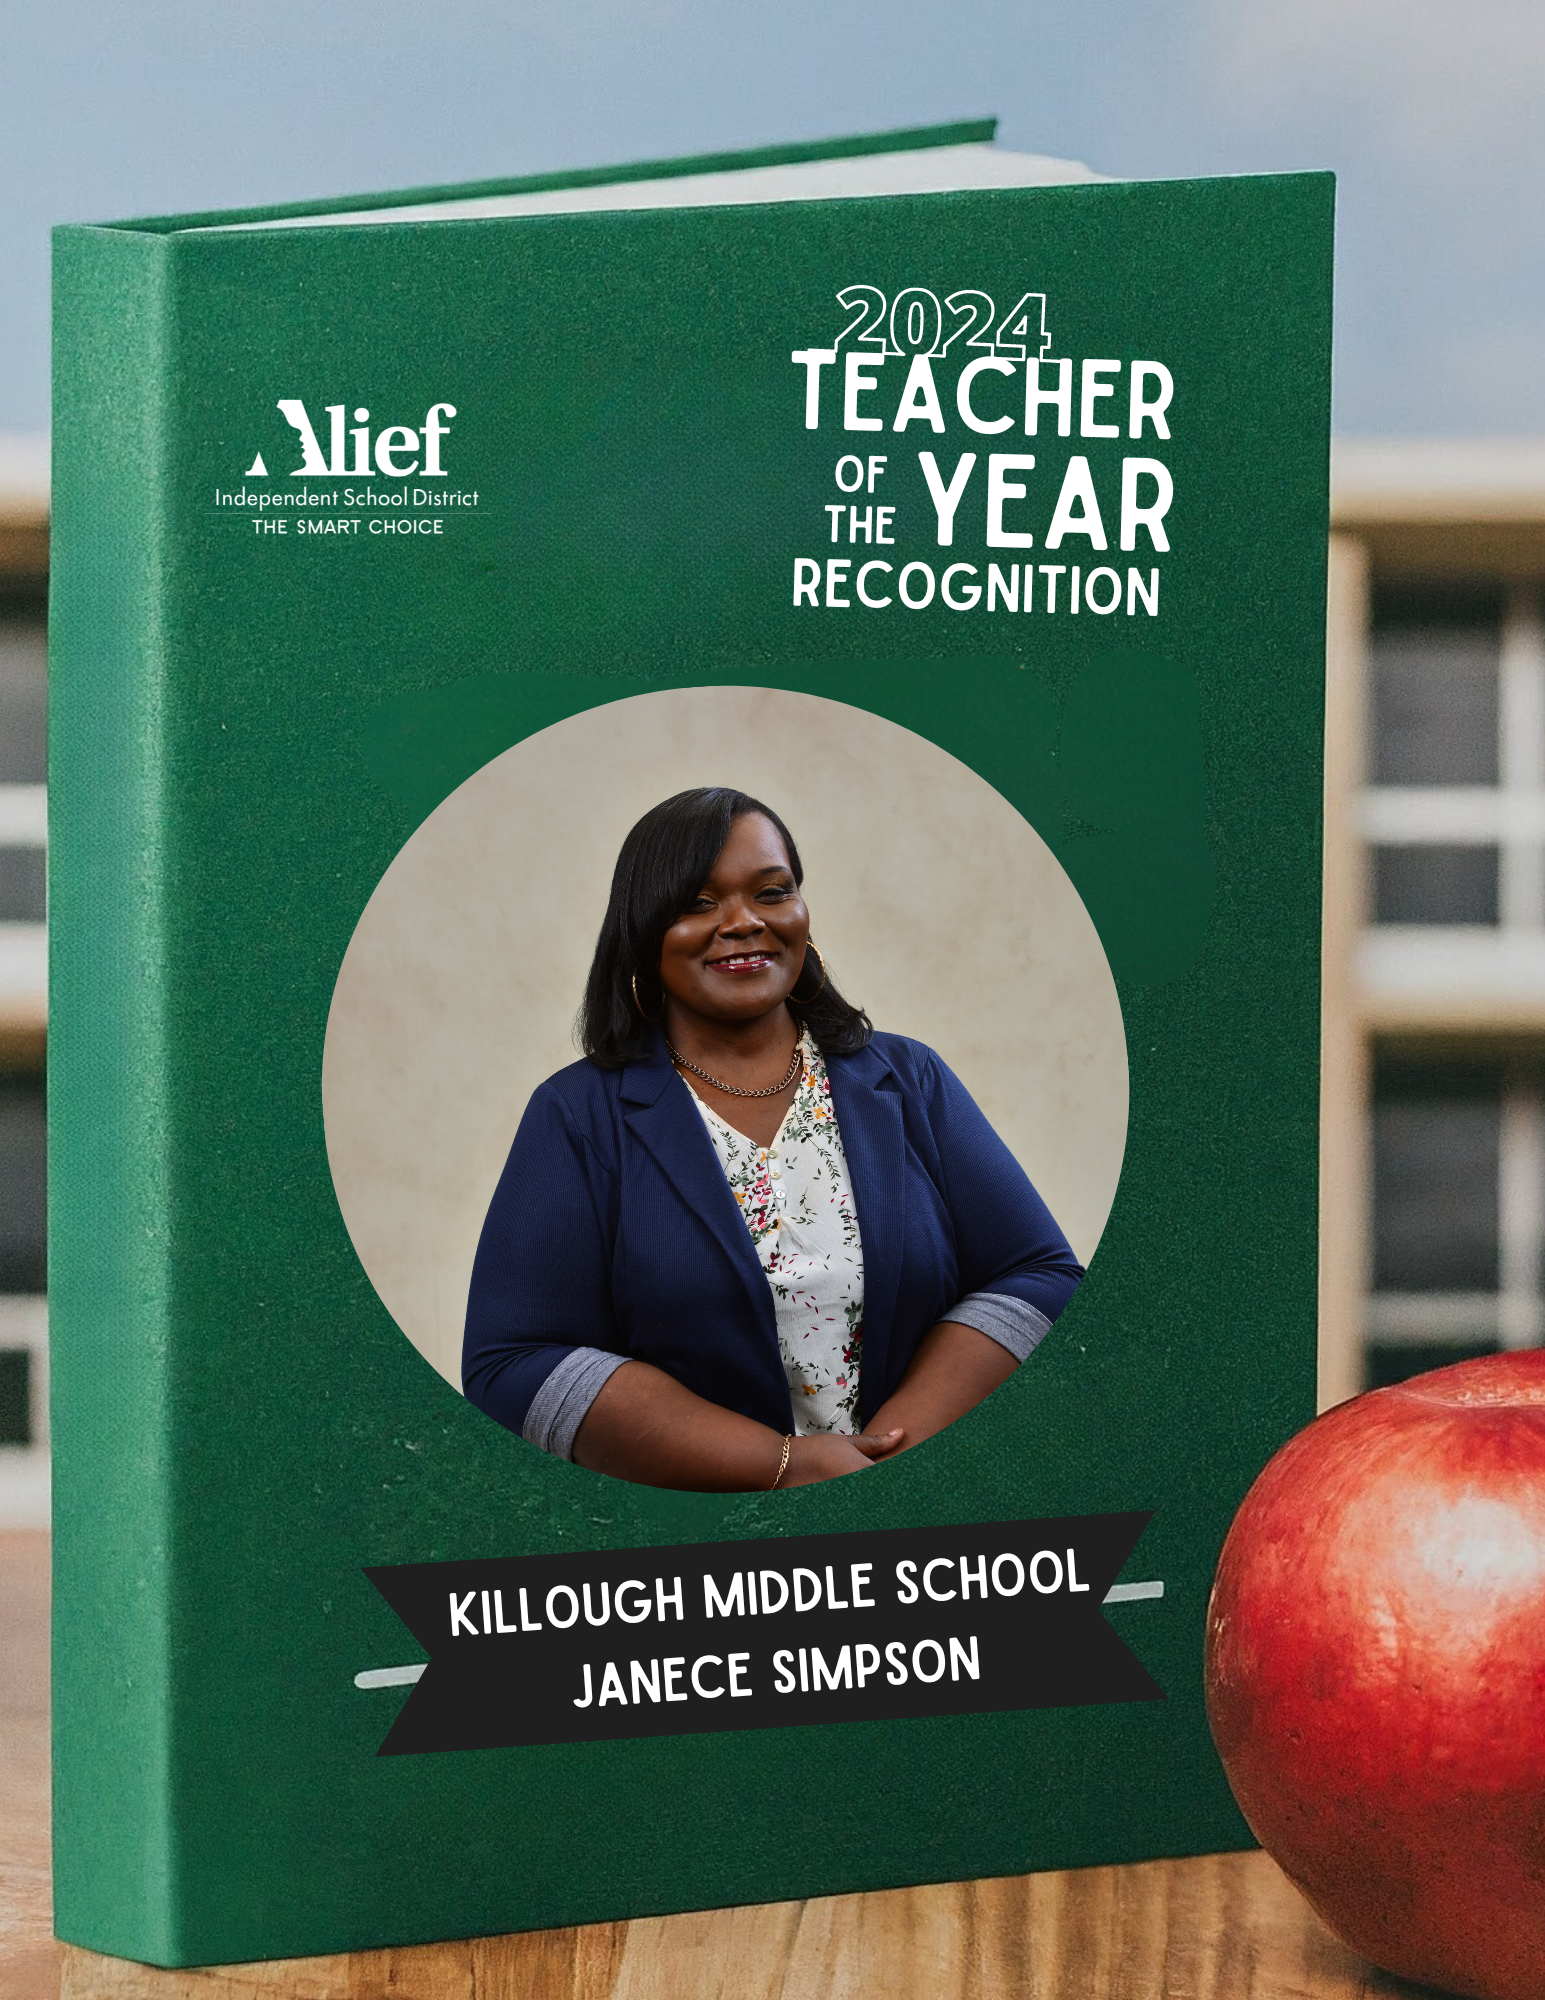 Janece Simpson from Killough Middle School named Secondary Teacher of the Year